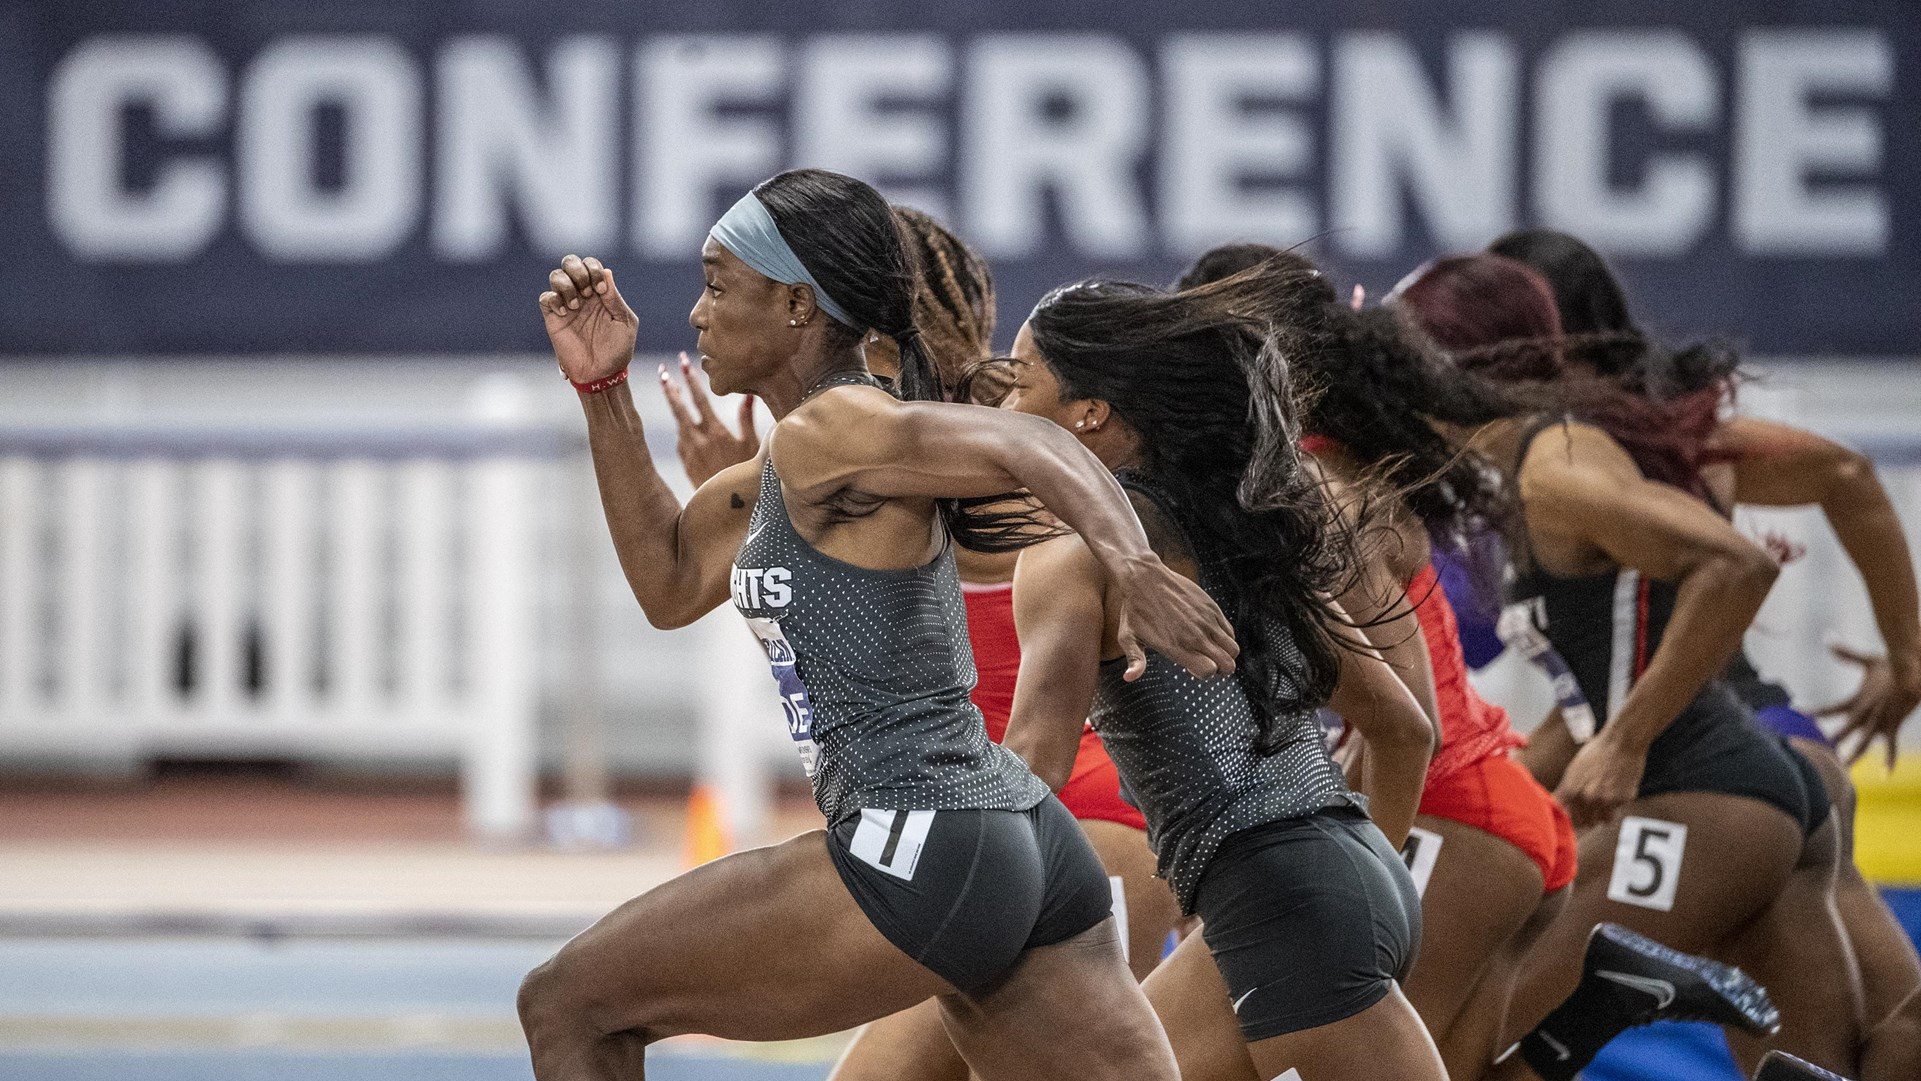 Women's Track and Field - UCF Athletics - Official Athletics Website